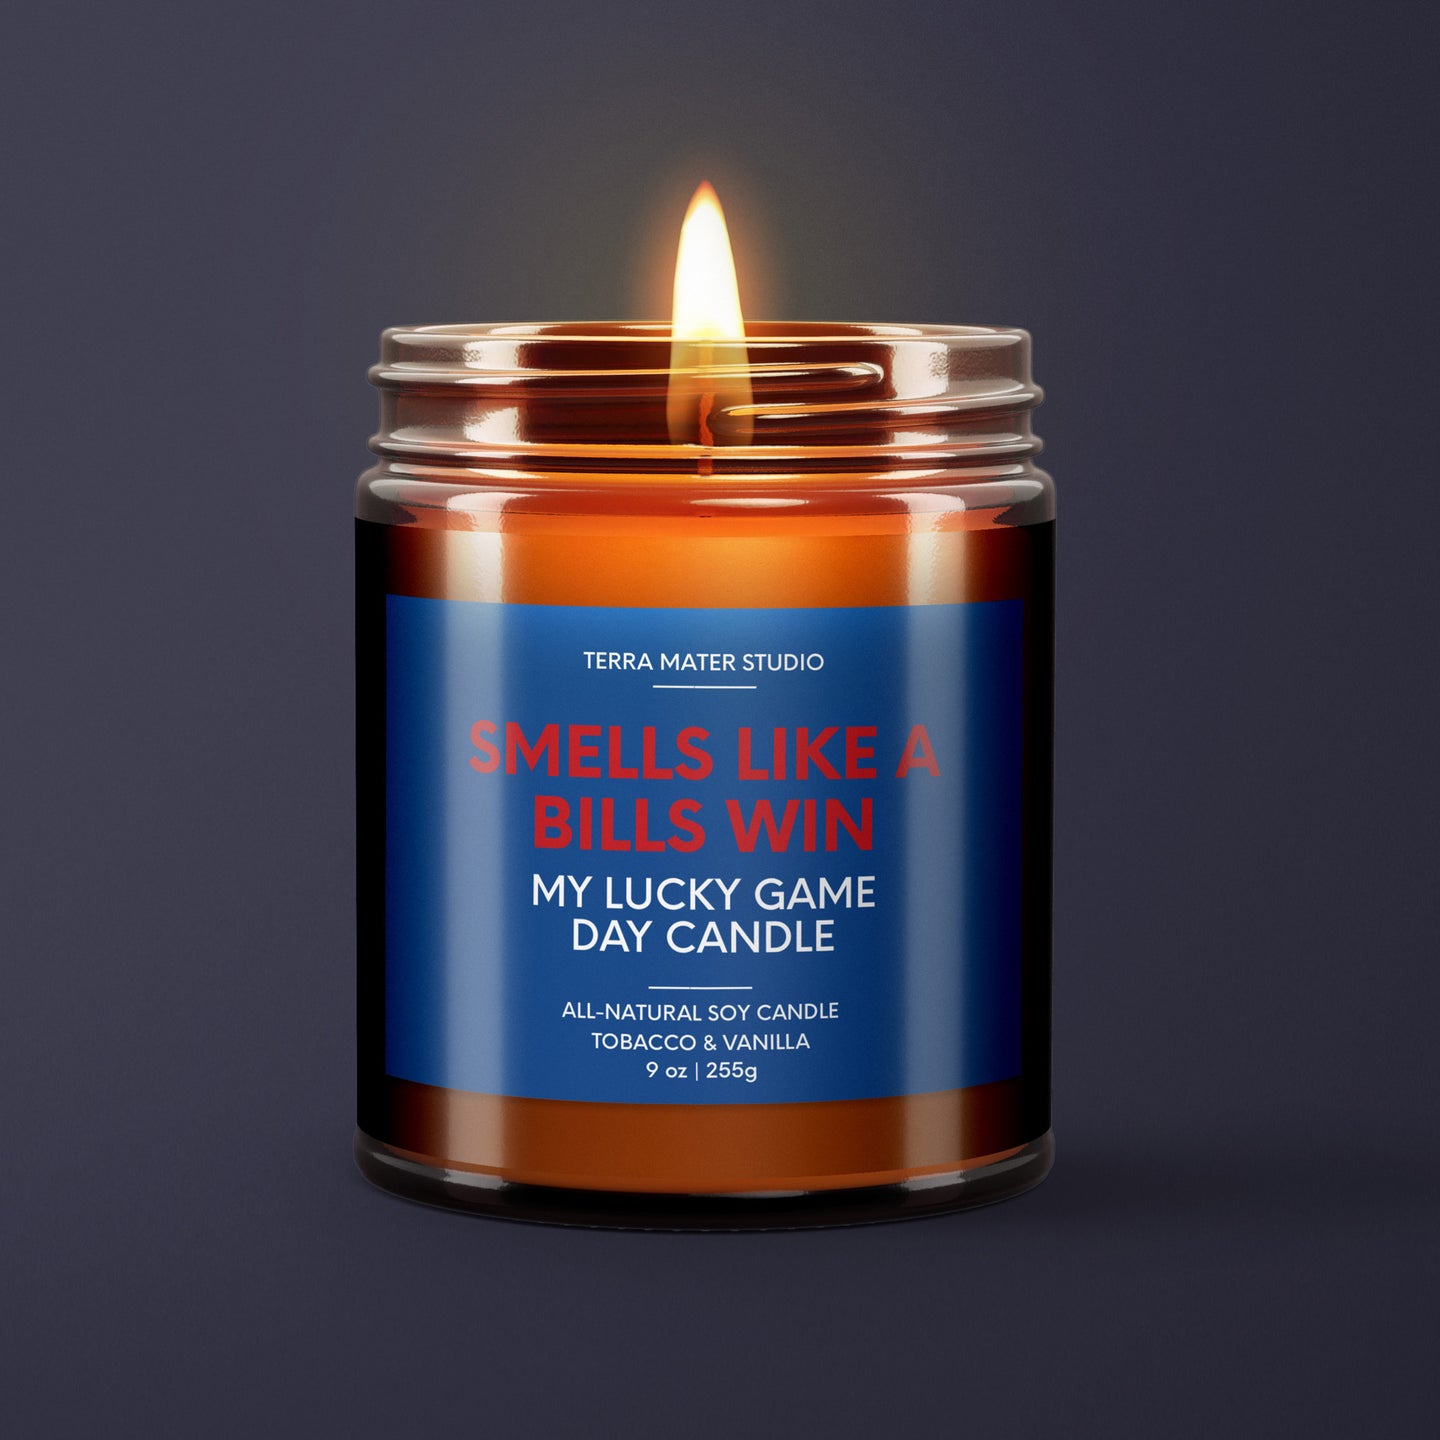 Smells Like A Bills Win | Buffalo Lucky Game Day Candle | Soy Wax Candle